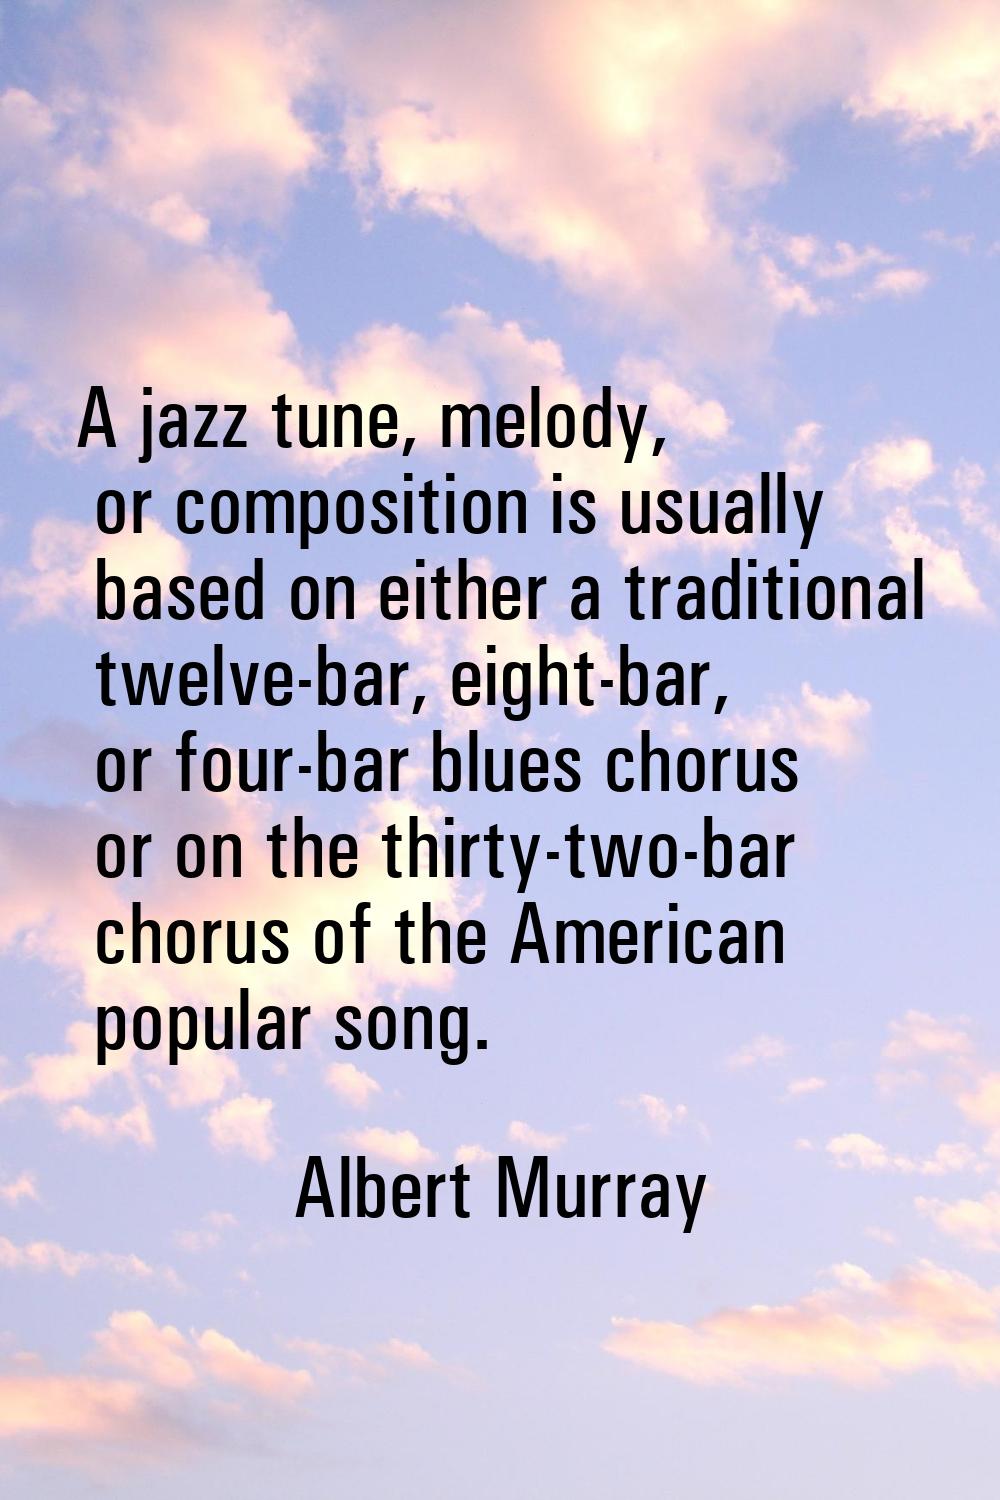 A jazz tune, melody, or composition is usually based on either a traditional twelve-bar, eight-bar,